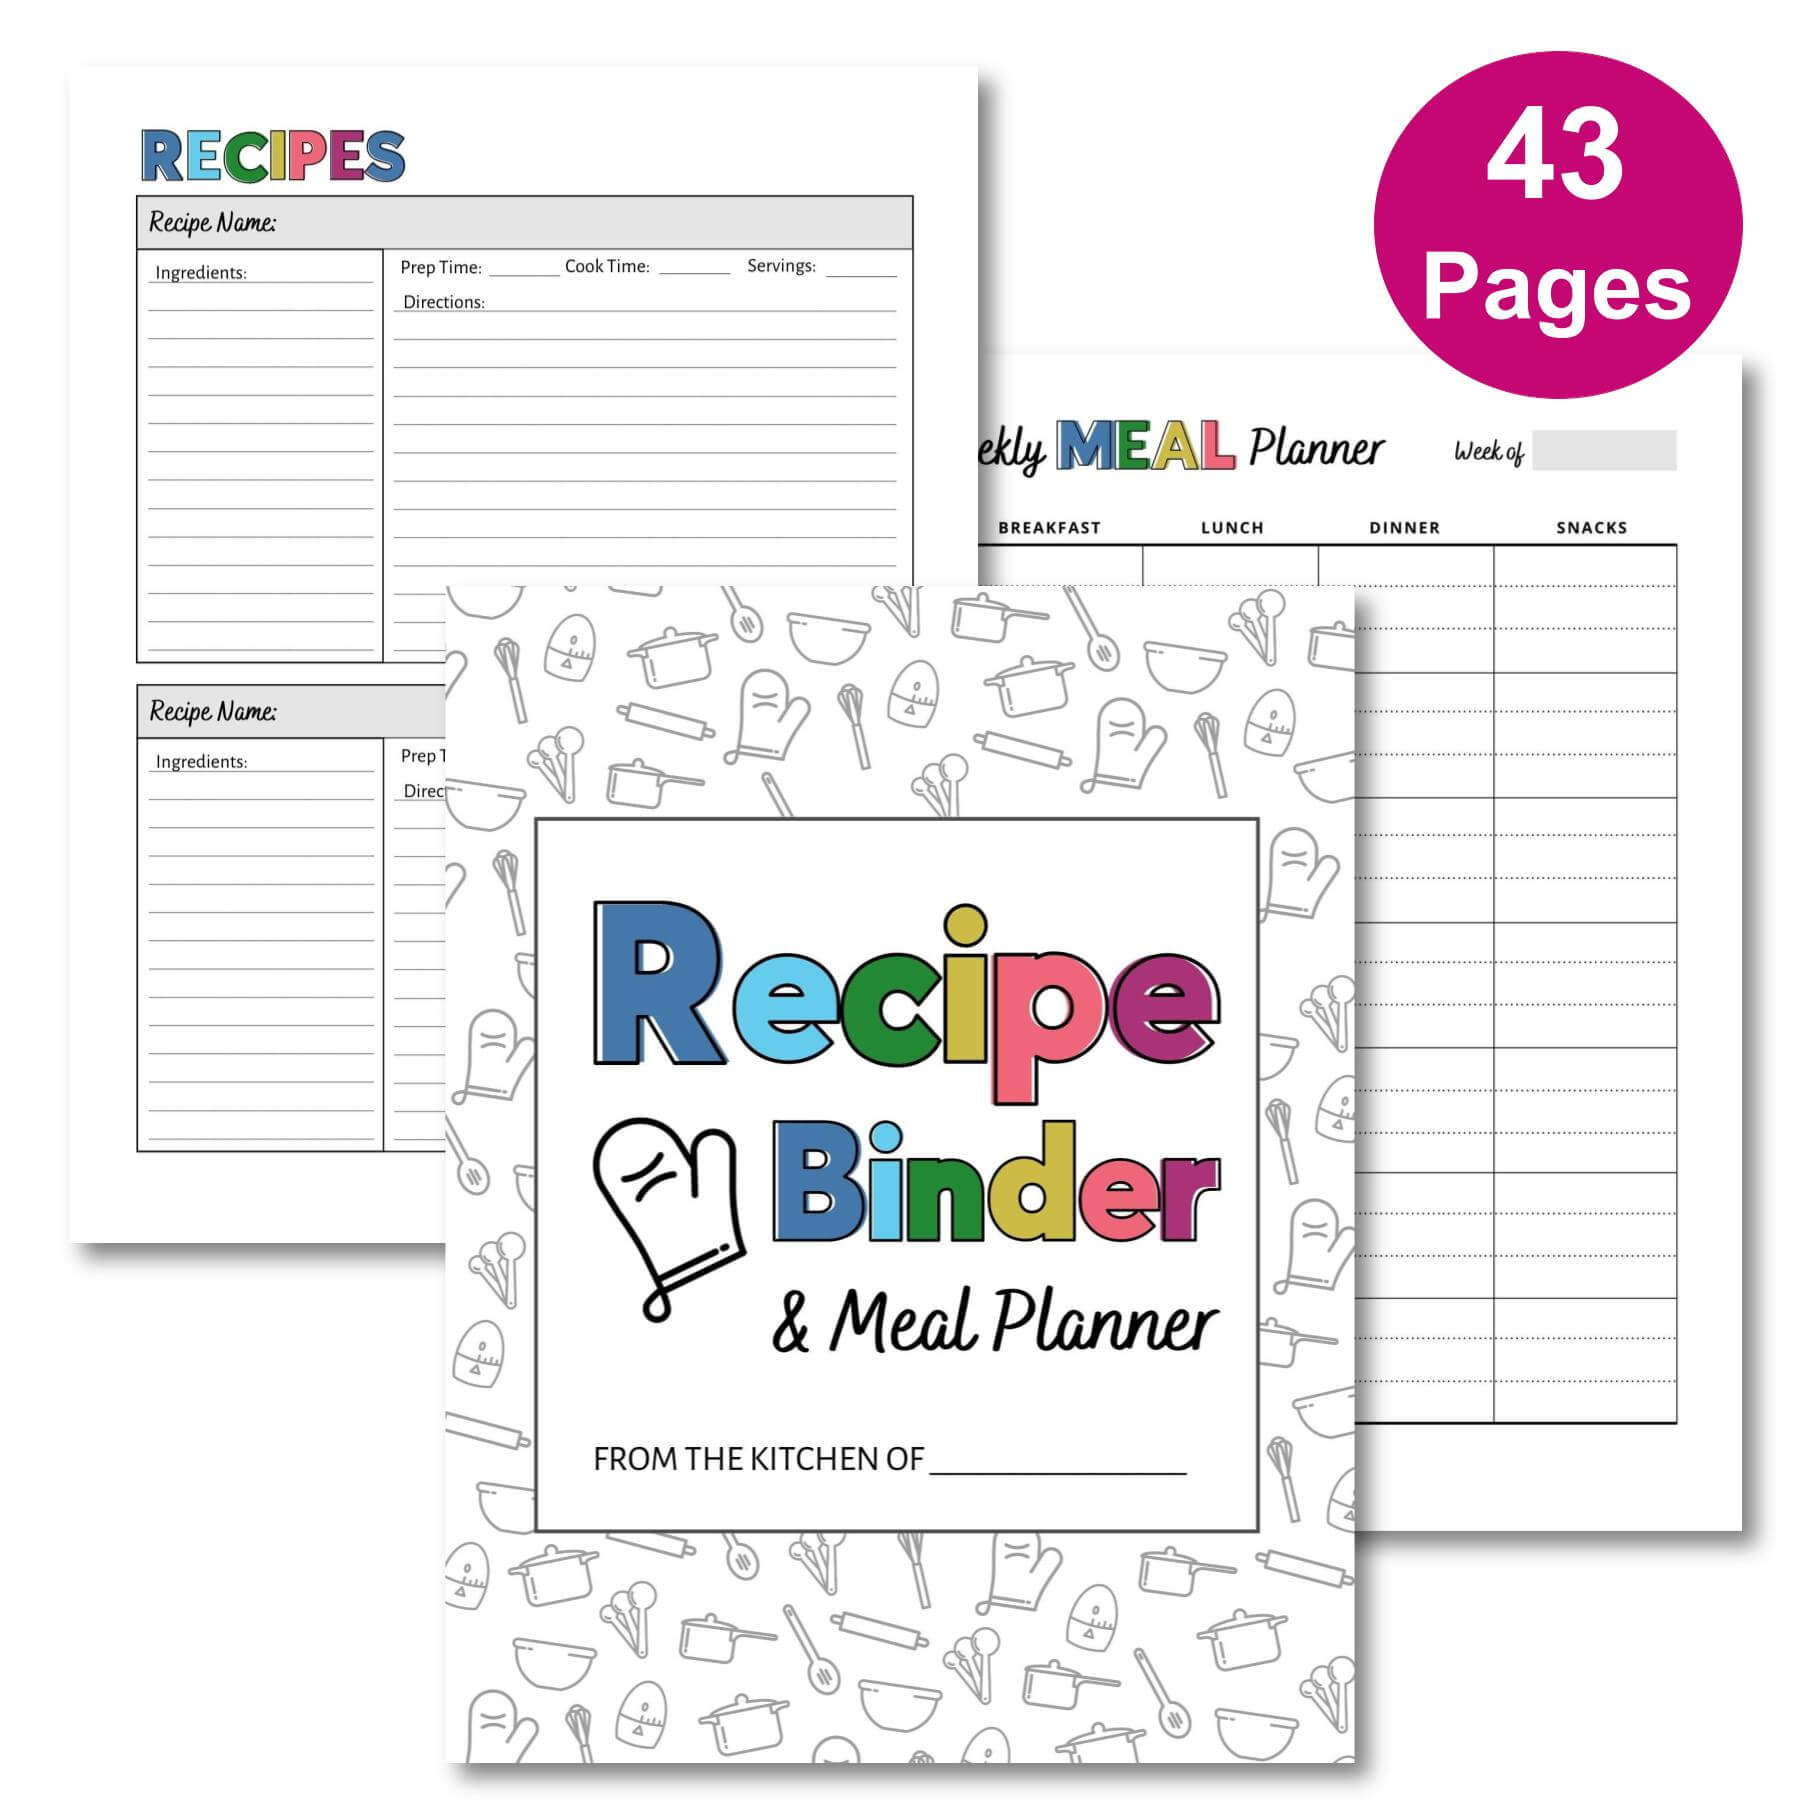 How to Create Your Own Meal Planning Recipe Binder - A Savory Feast